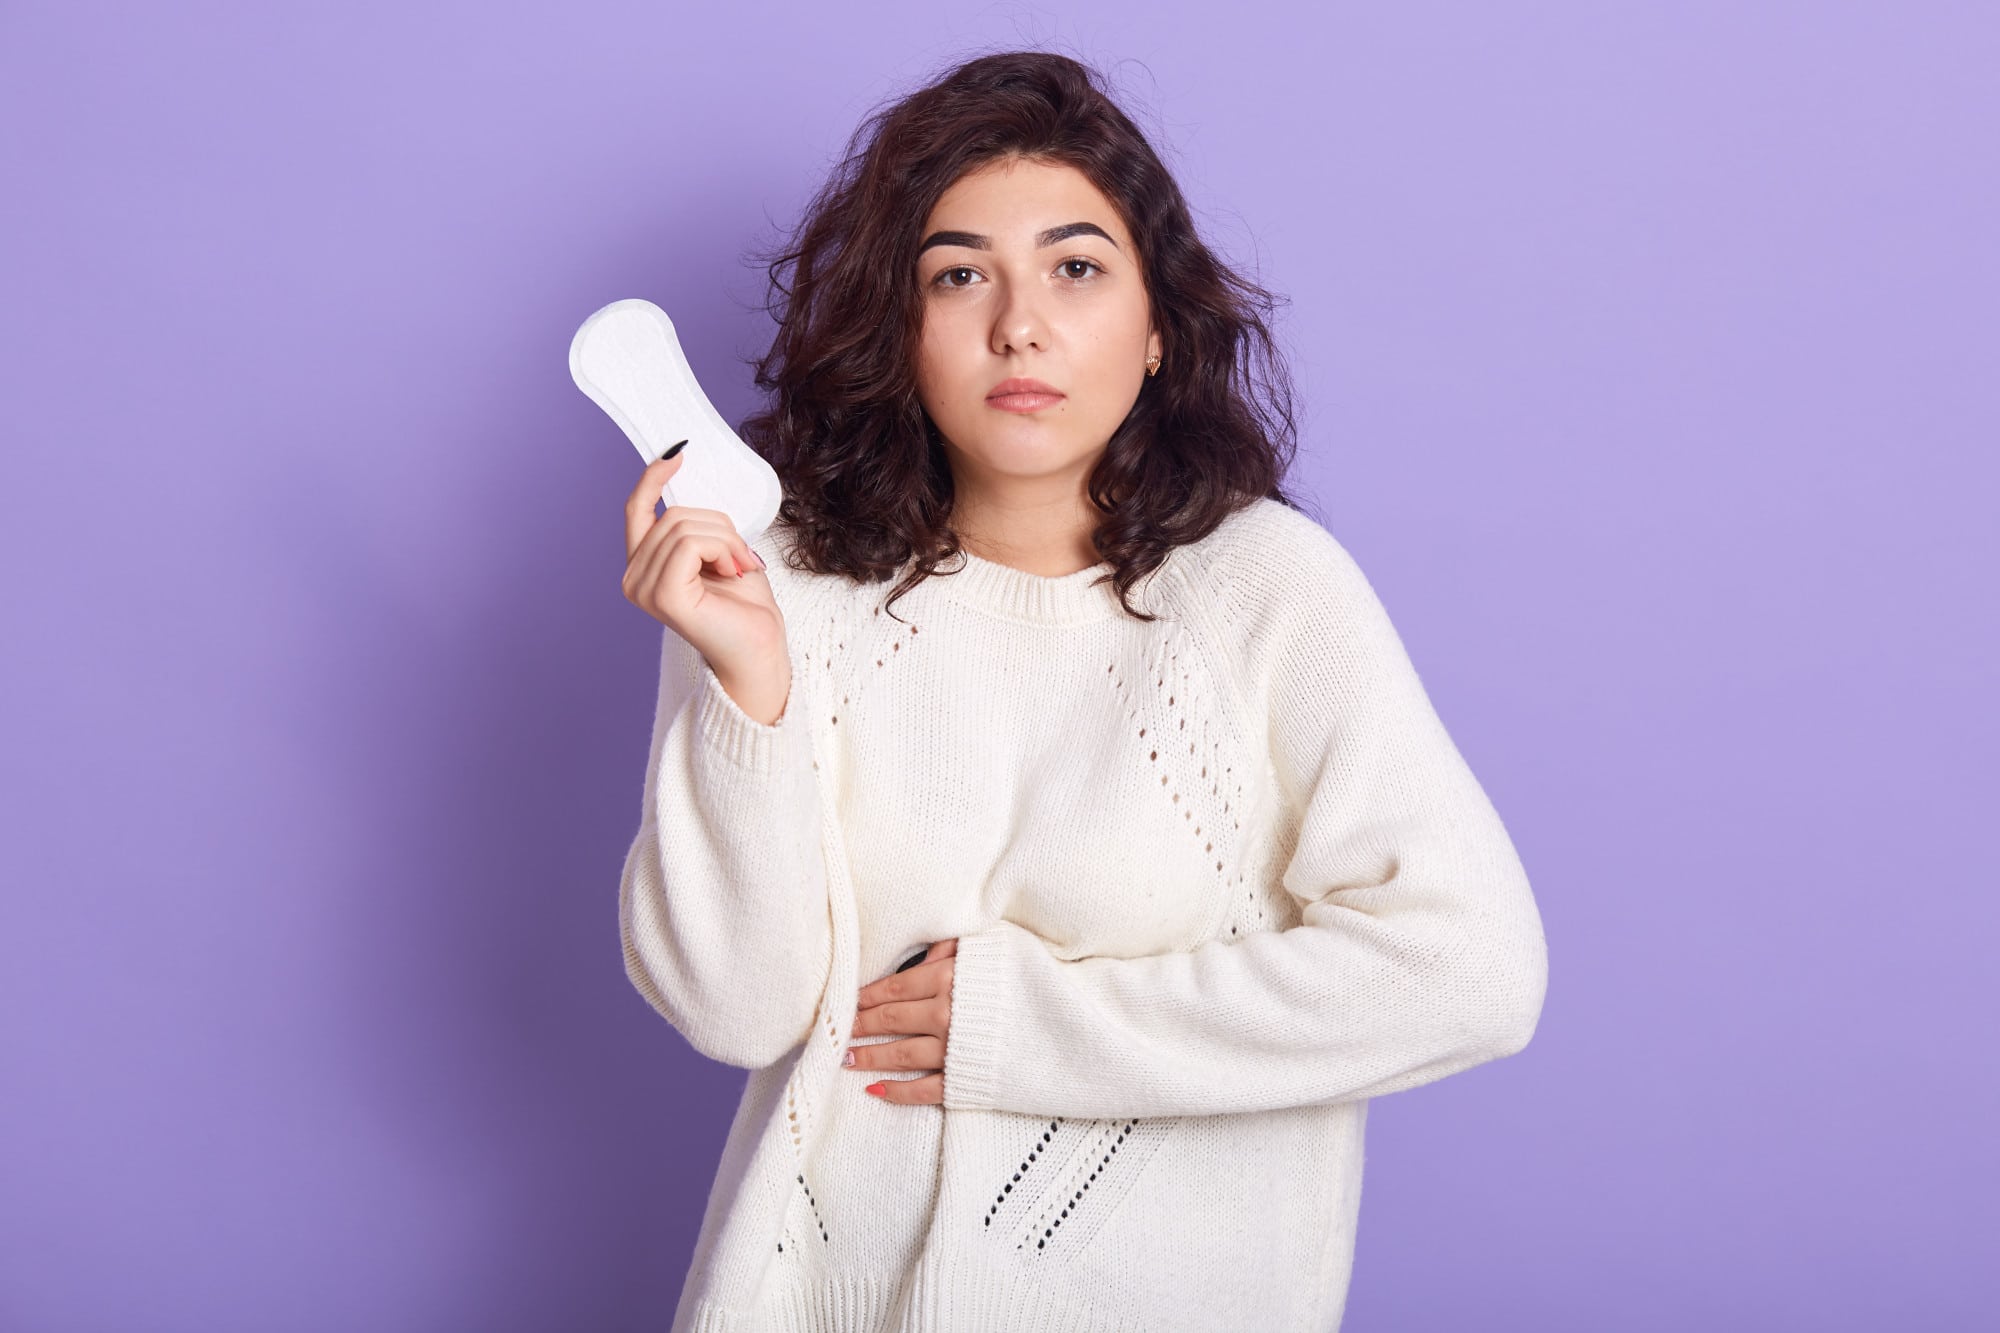 Menstrual cramps : Types, Causes, and Treatment